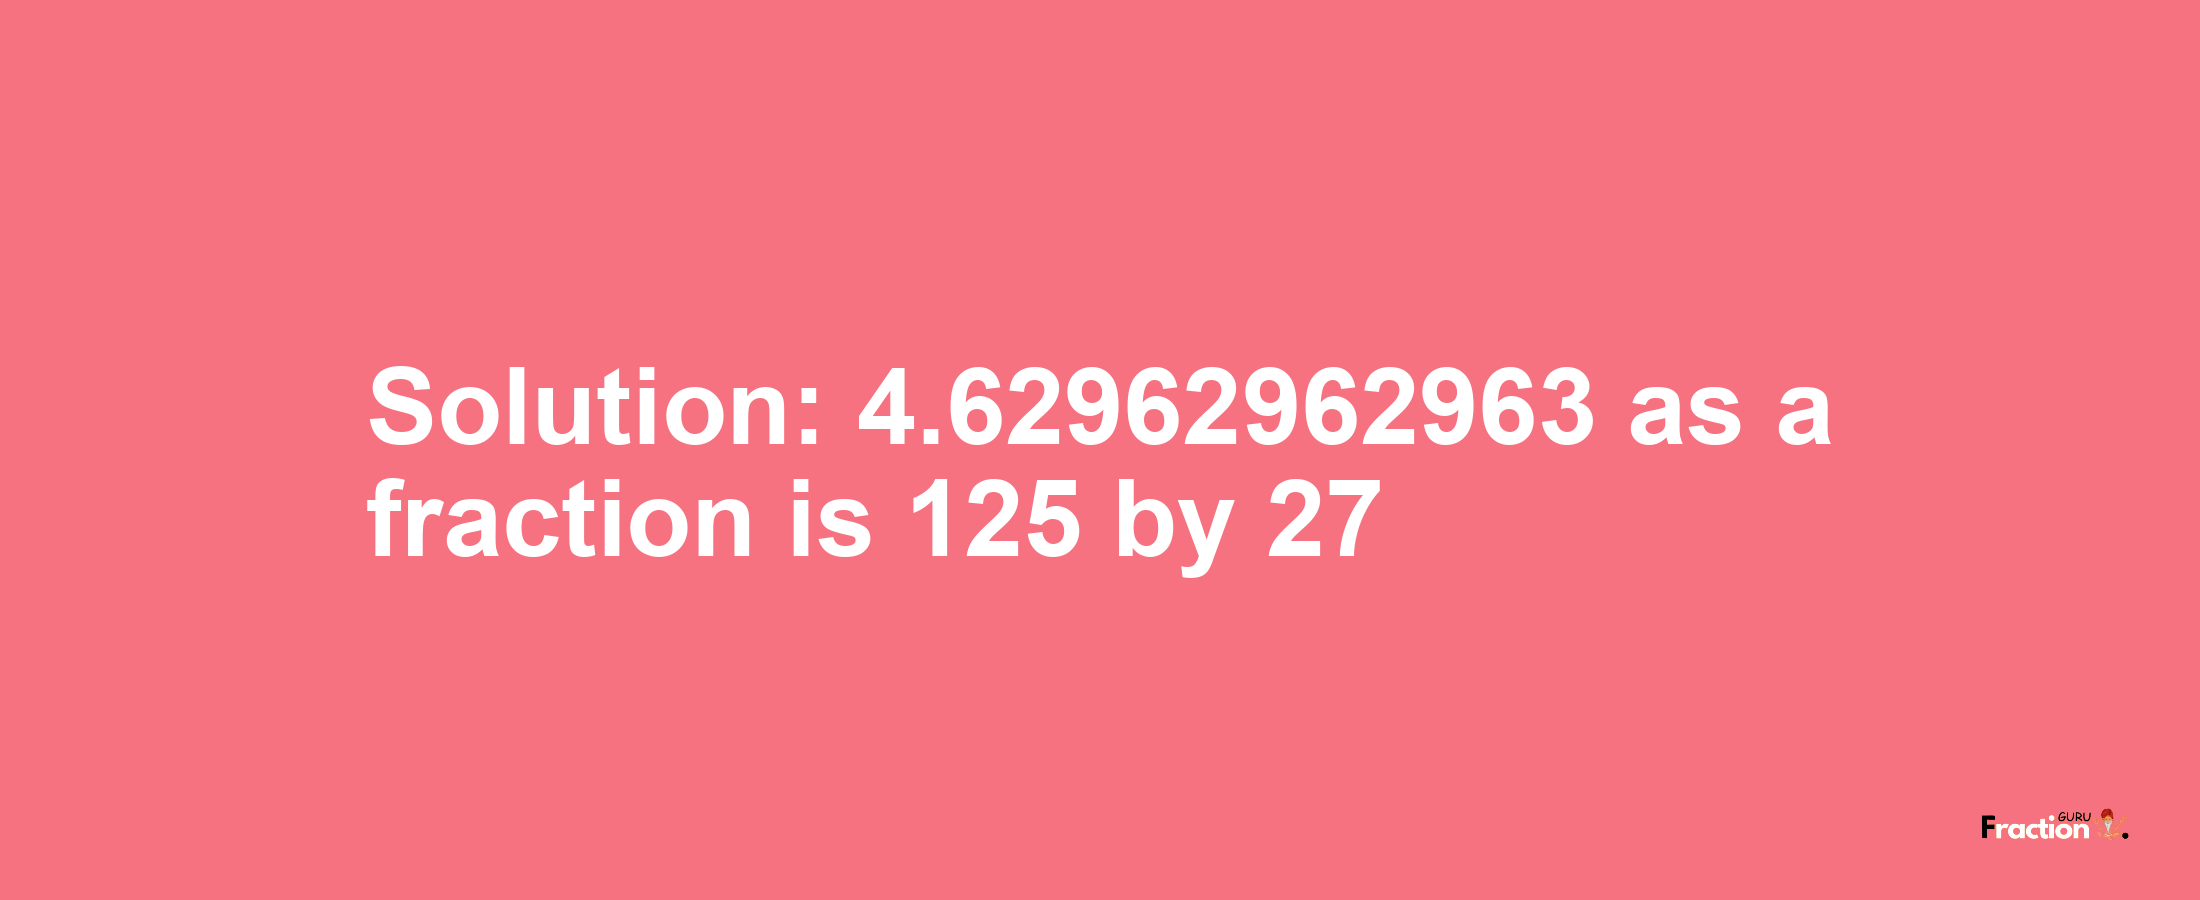 Solution:4.62962962963 as a fraction is 125/27